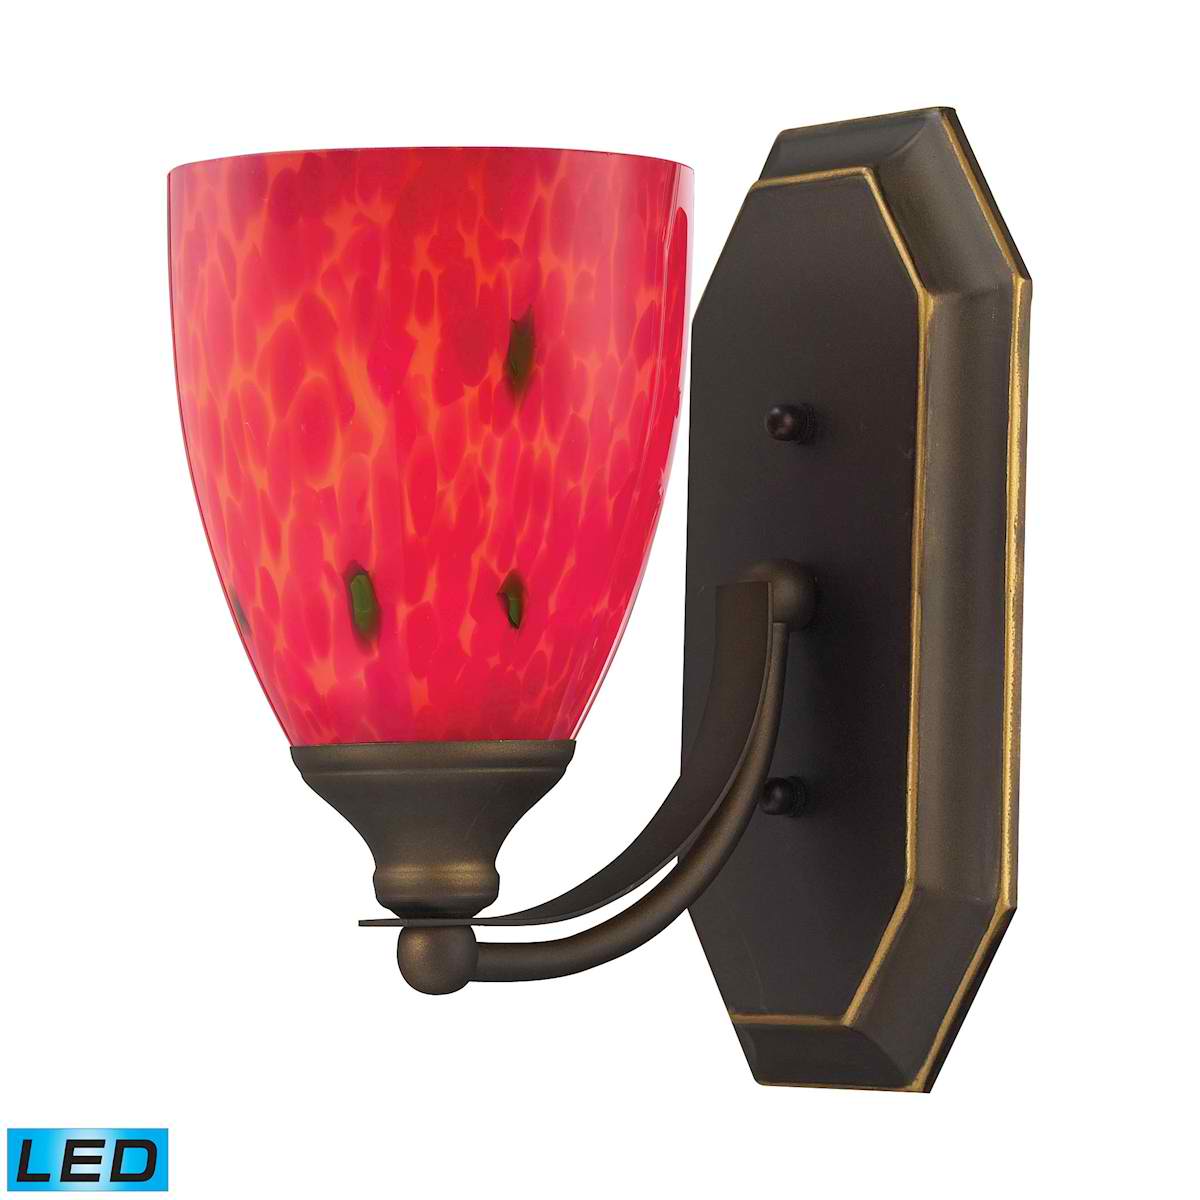 1 Light Vanity in Aged Bronze and Fire Red Glass - LED Offering Up To 800 Lumens (60 Watt Equivalent)